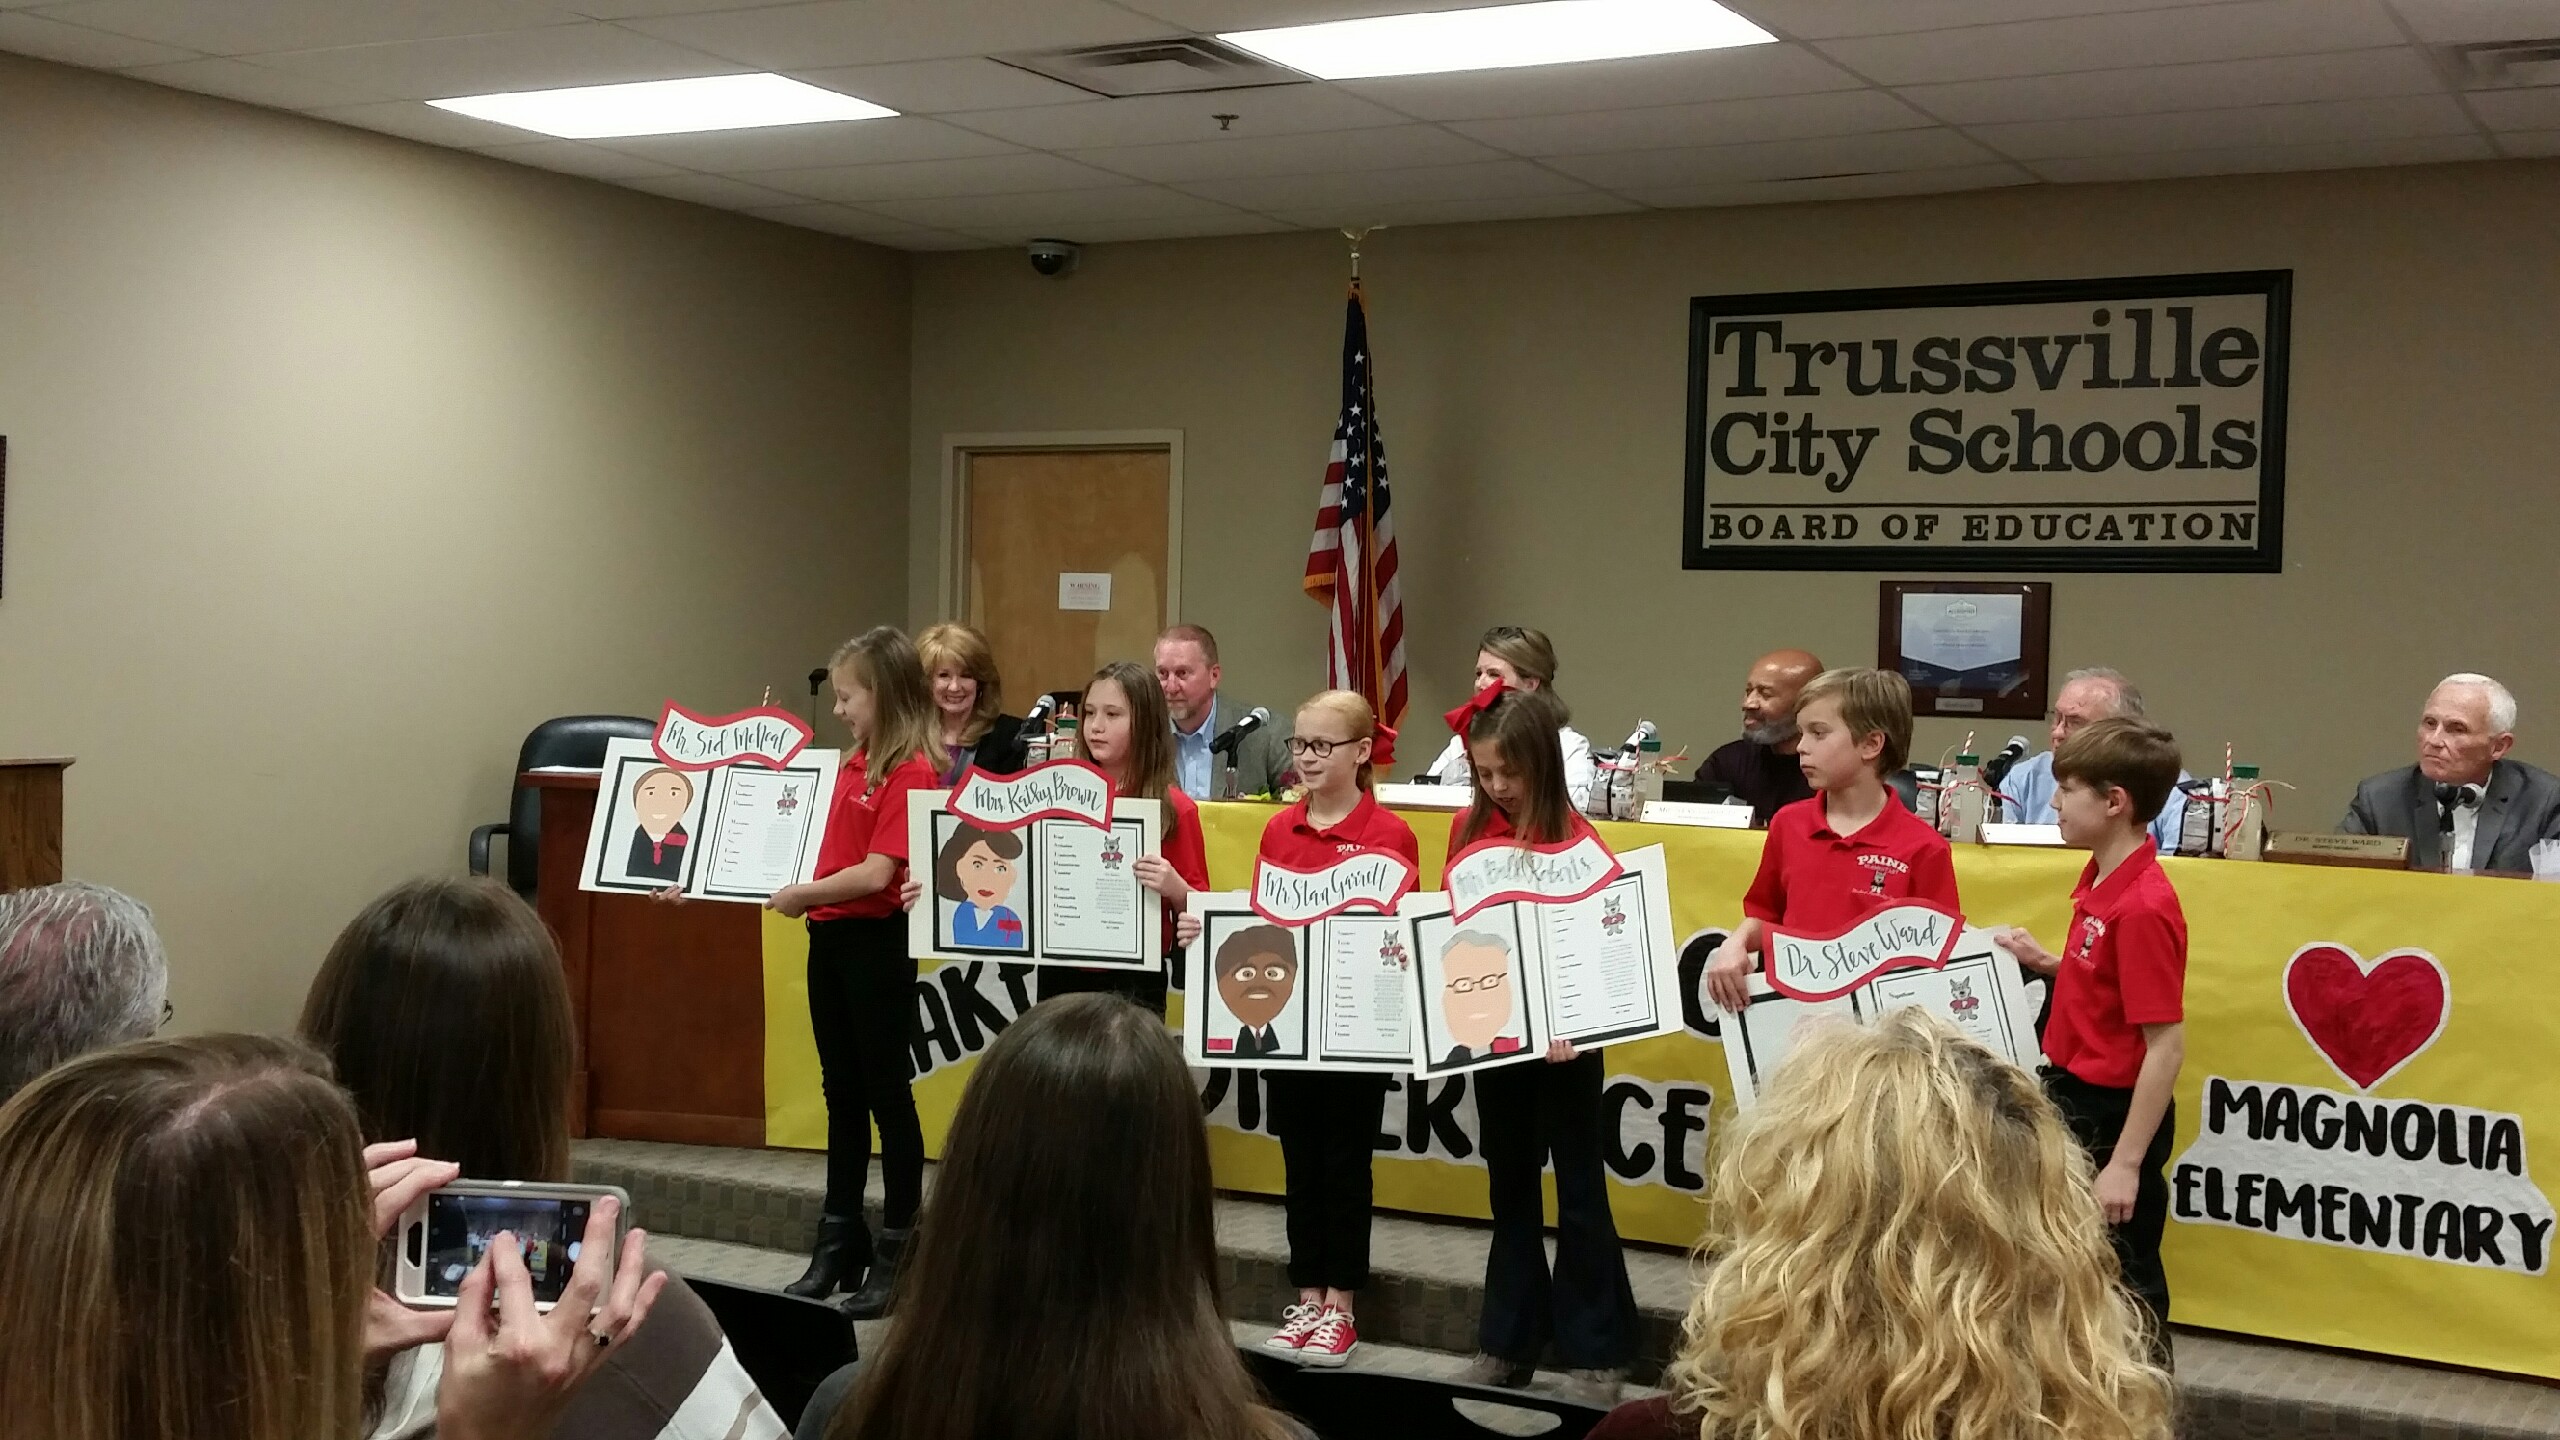 students-honor-trussville-city-schools-board-members-the-trussville